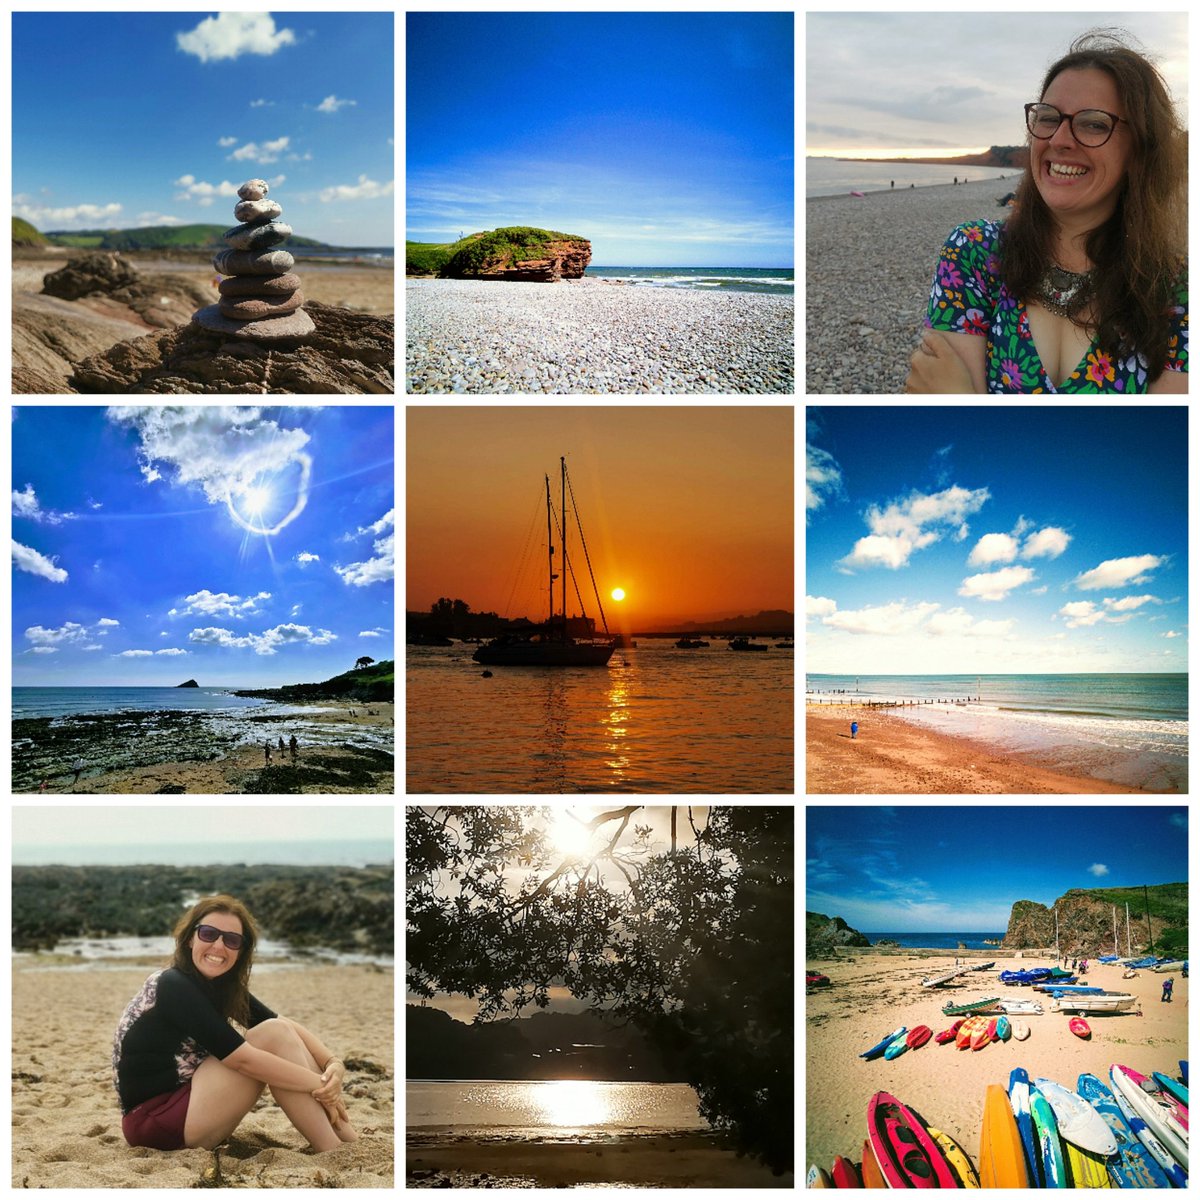 Unpopular opinion: I'm not a fan of the #beach... @SianVidak loves it, so do #9kids, that makes every trip worthwhile. I also love the #photos I take there.
How many are already longing for #summer?
#miniexplorers #seasons #happywifehappylife #sunset #author #inspiration #Devon